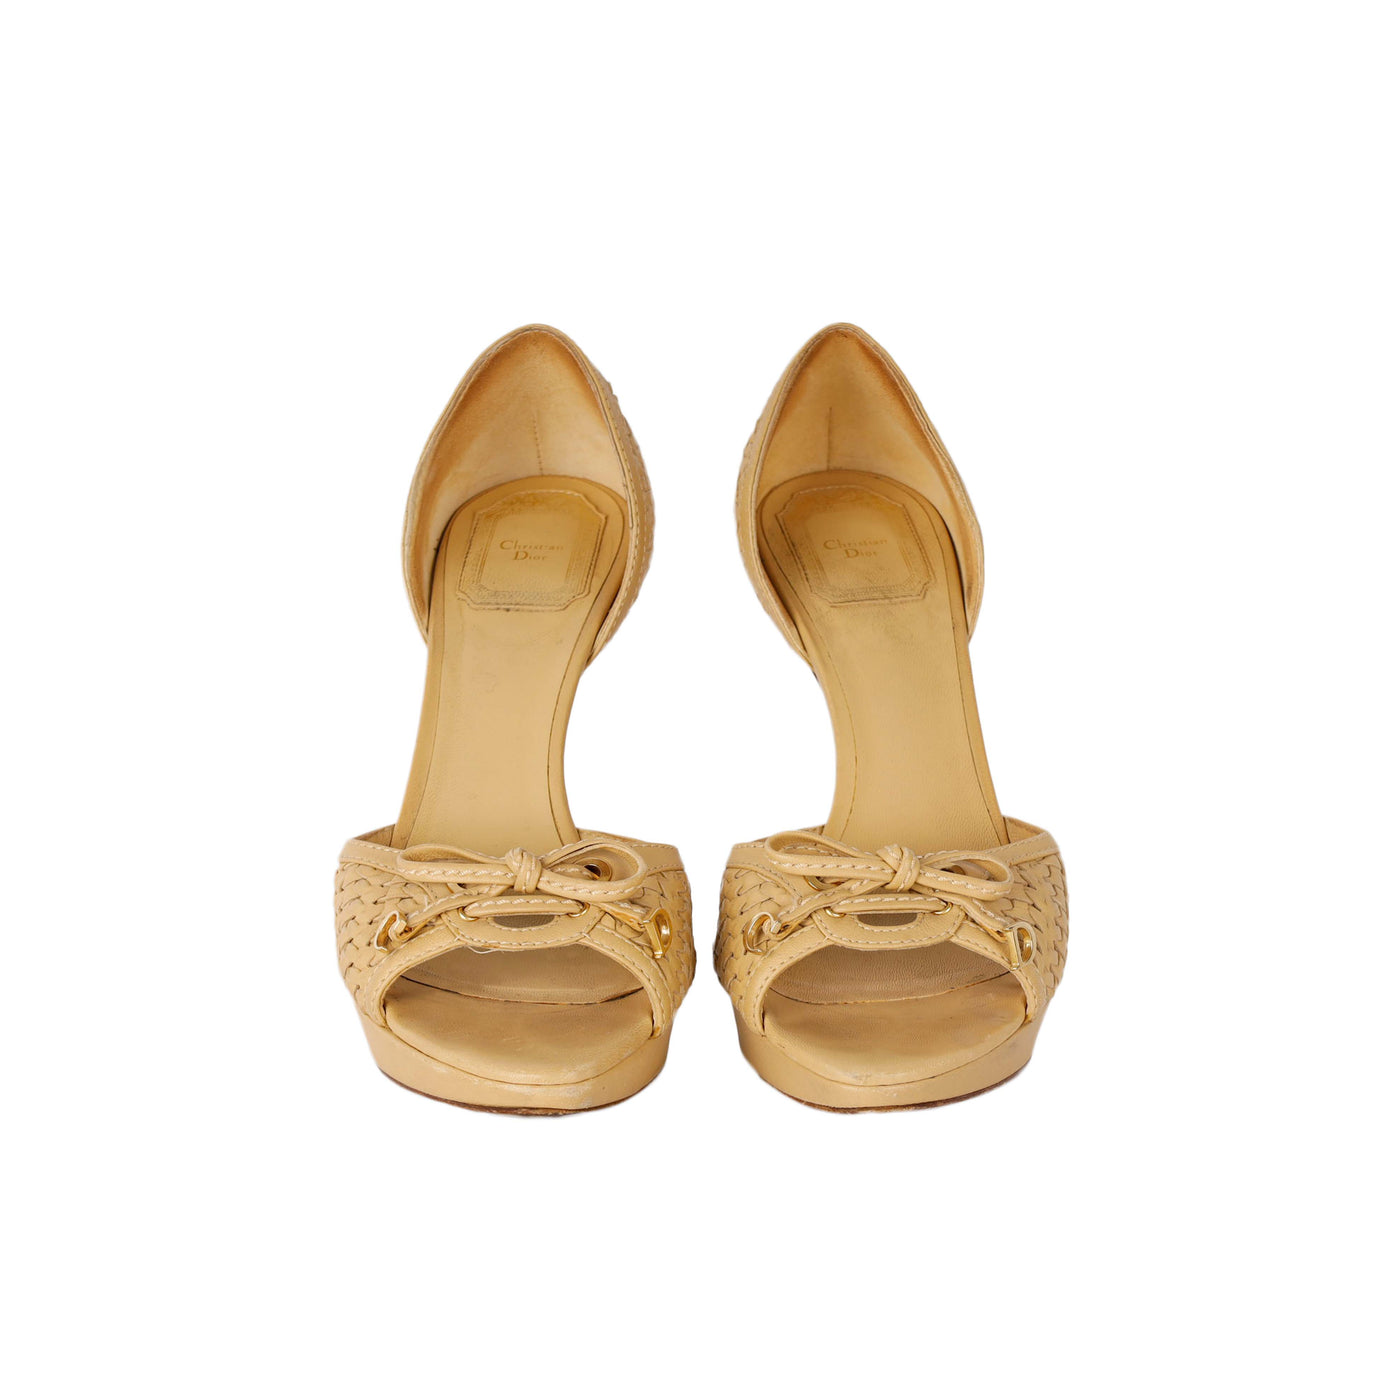 Secondhand Dior Beige Leather Peeptoe Heels with Bow